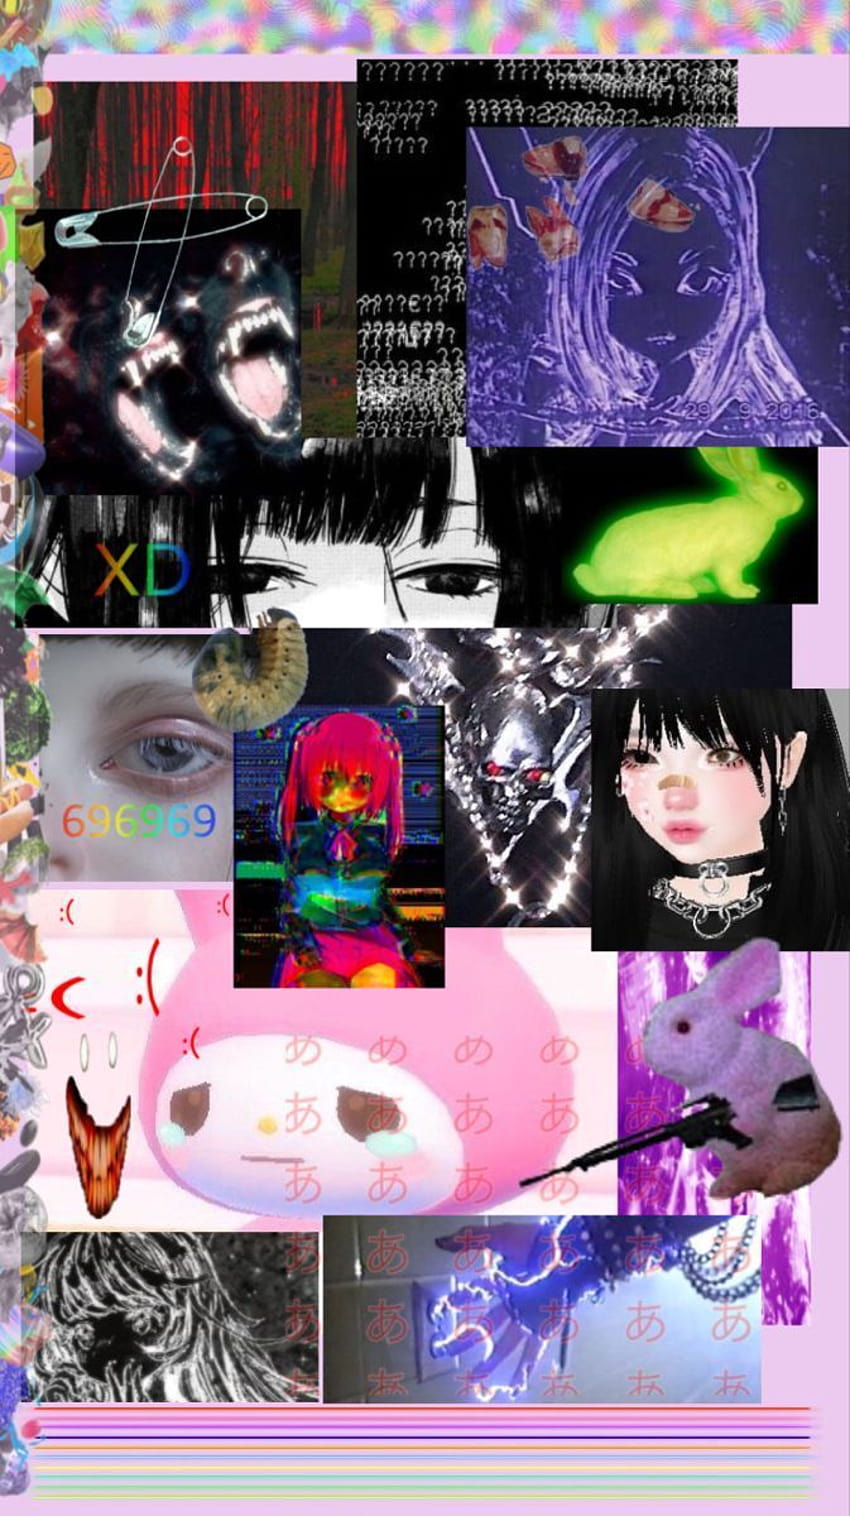 A collage of pictures with different colors - Webcore, weirdcore, traumacore